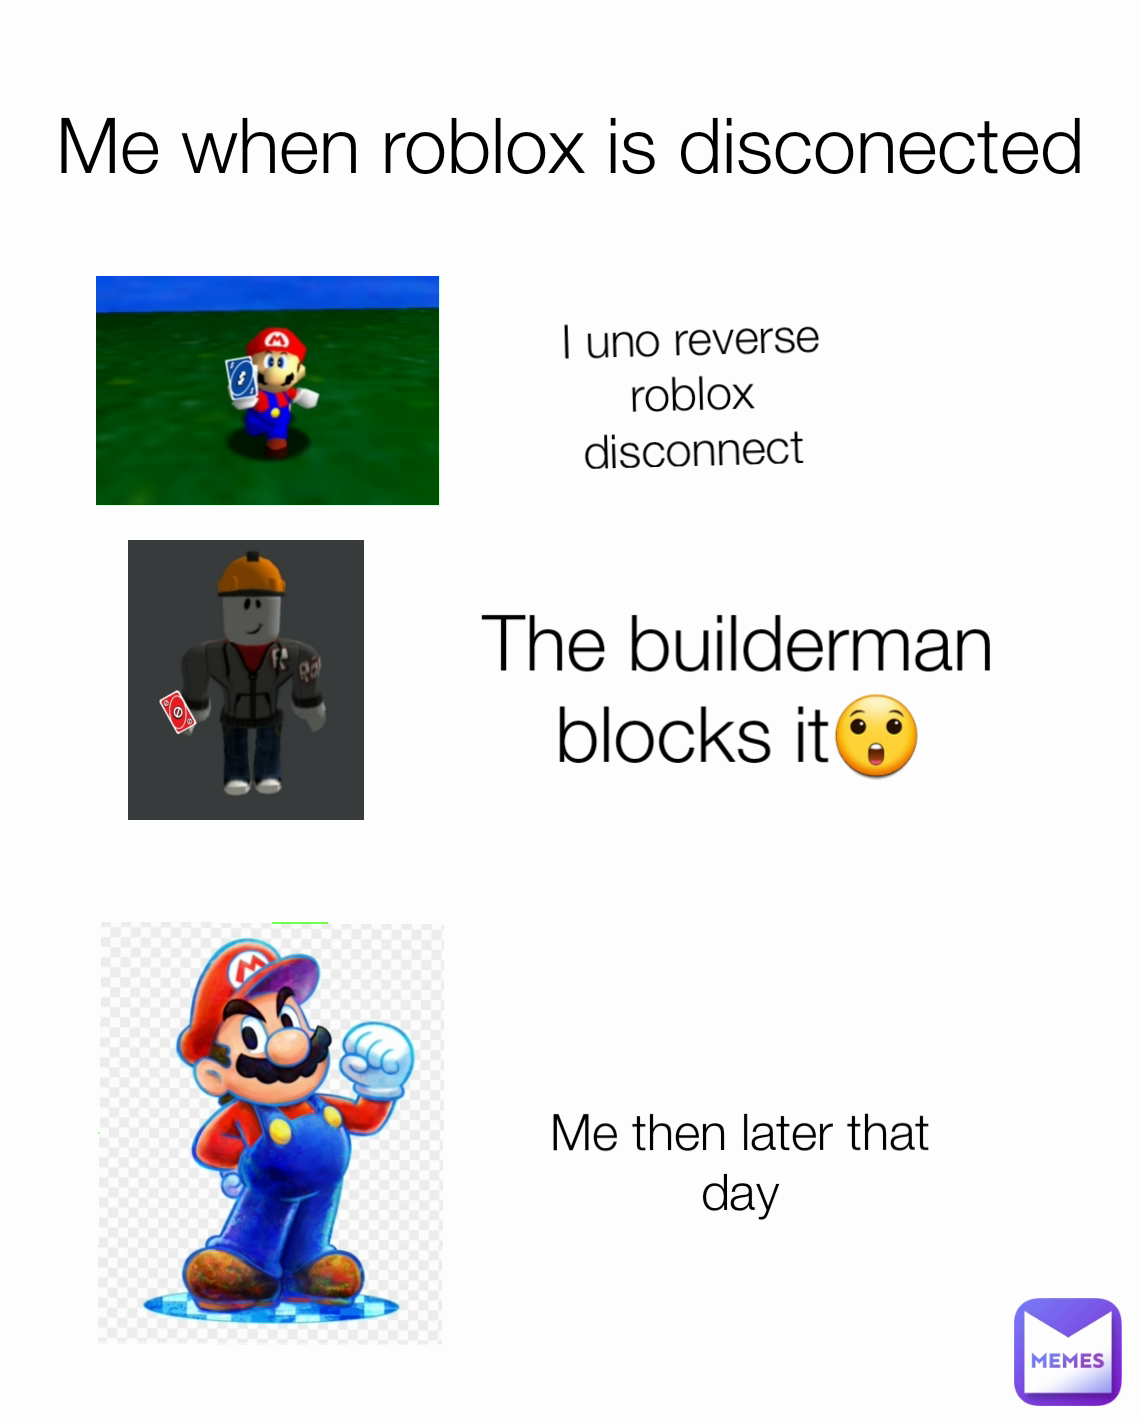 Me when roblox is disconected Me then later that day
 The builderman blocks it😲 I uno reverse roblox disconnect